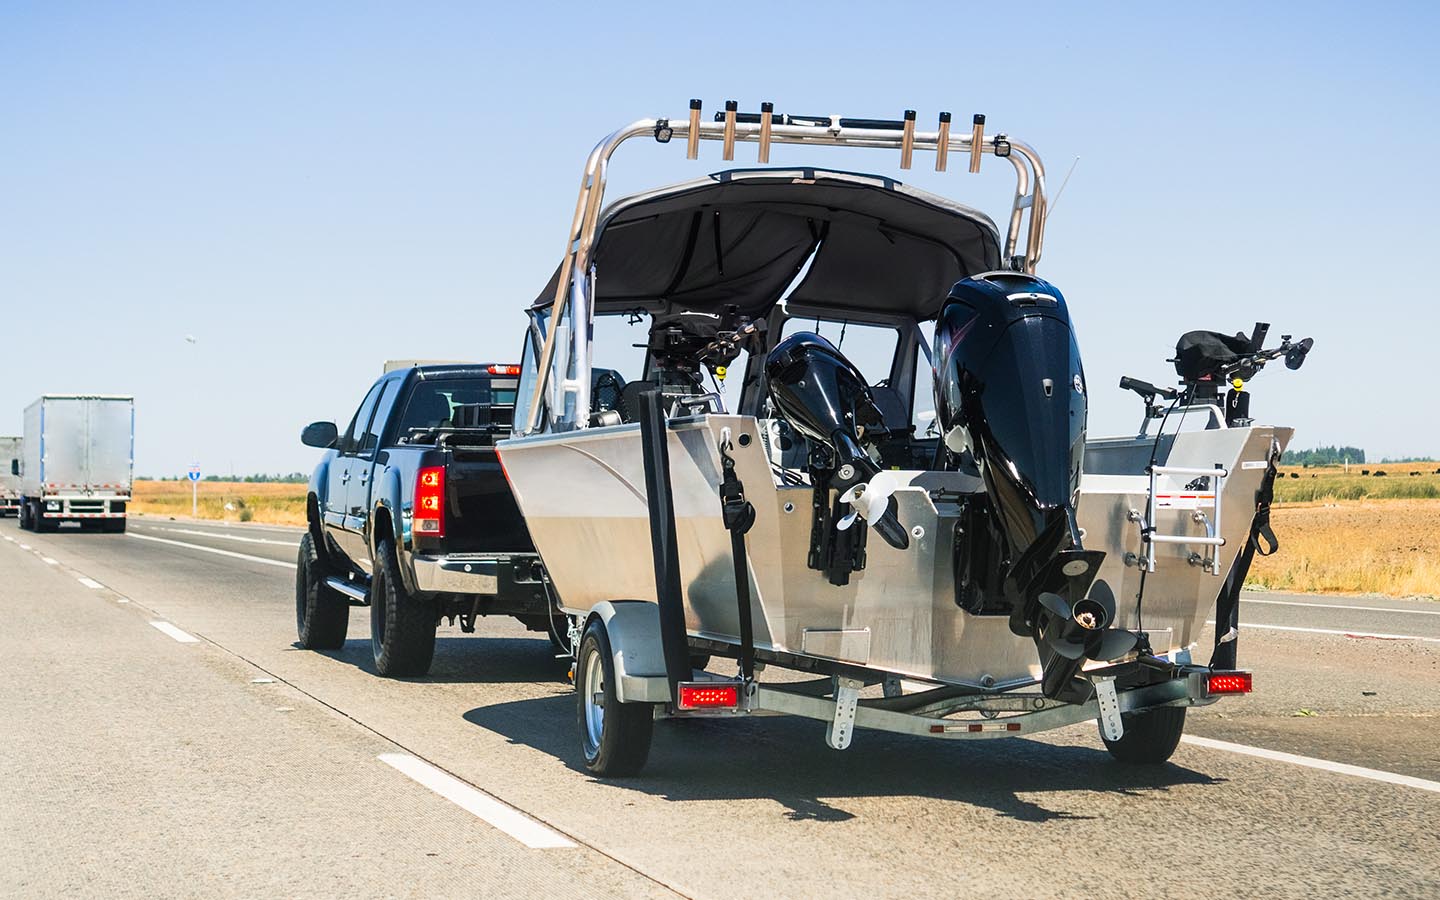 etorque in cars increases the towing capacity